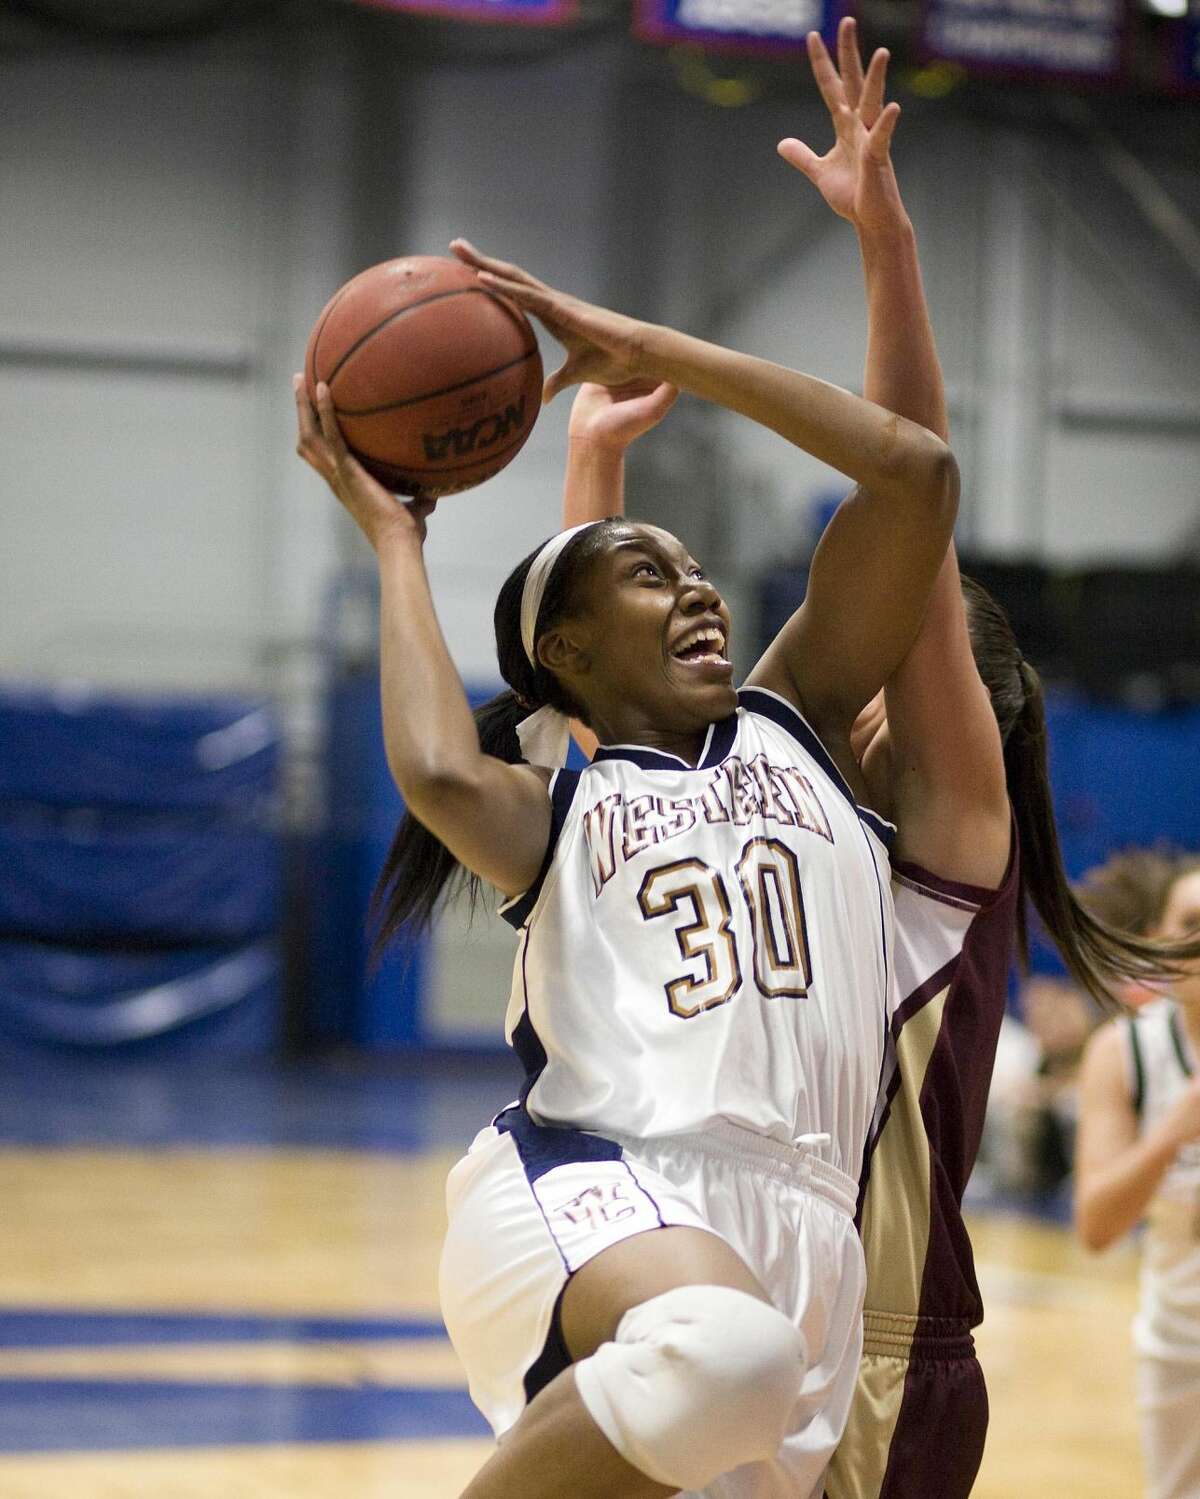 Melissa Teel during her playing days at Western Connecticut State University.